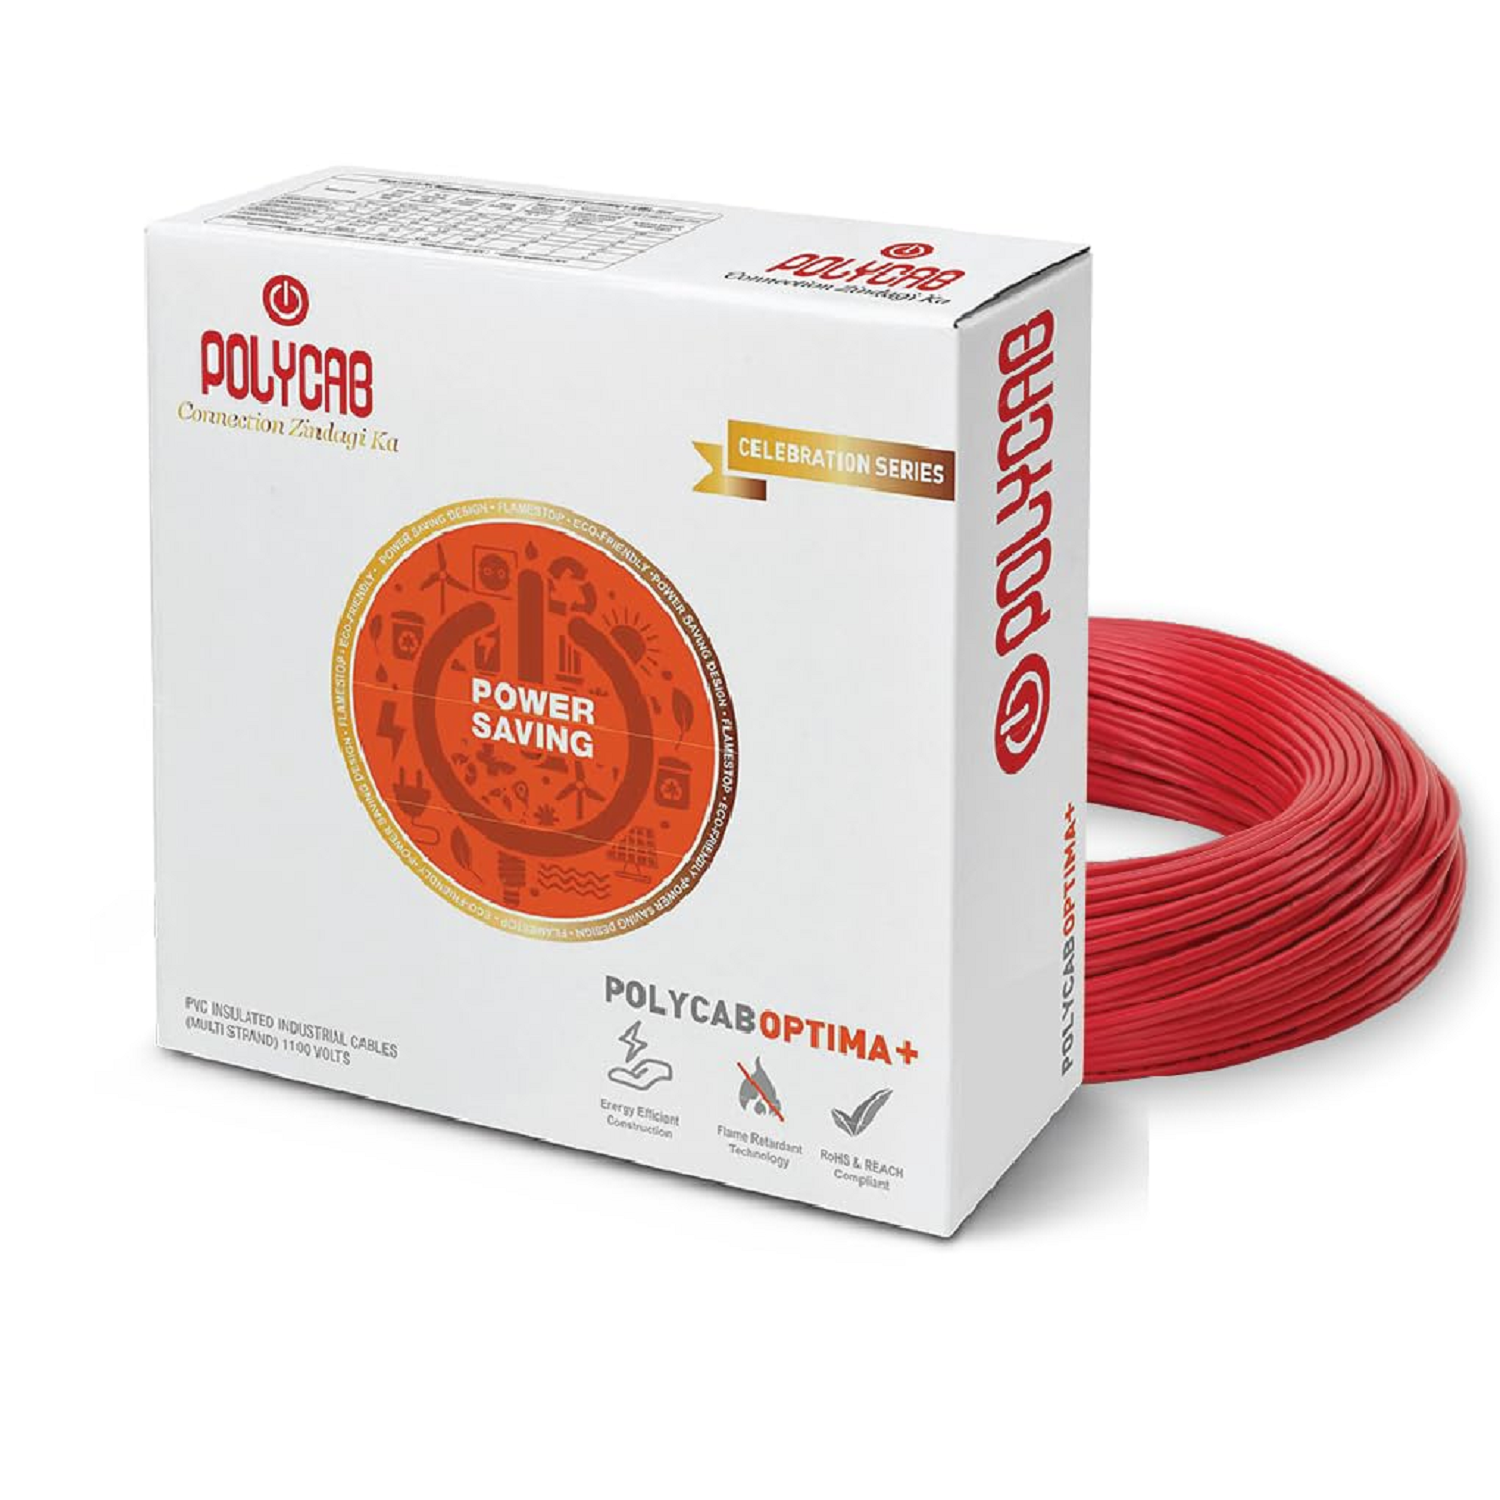 Polycab Optima Plus FR-LF 0.75 SQ-MM, 90 Meters PVC Insulated Copper Wire Single Core (Red)